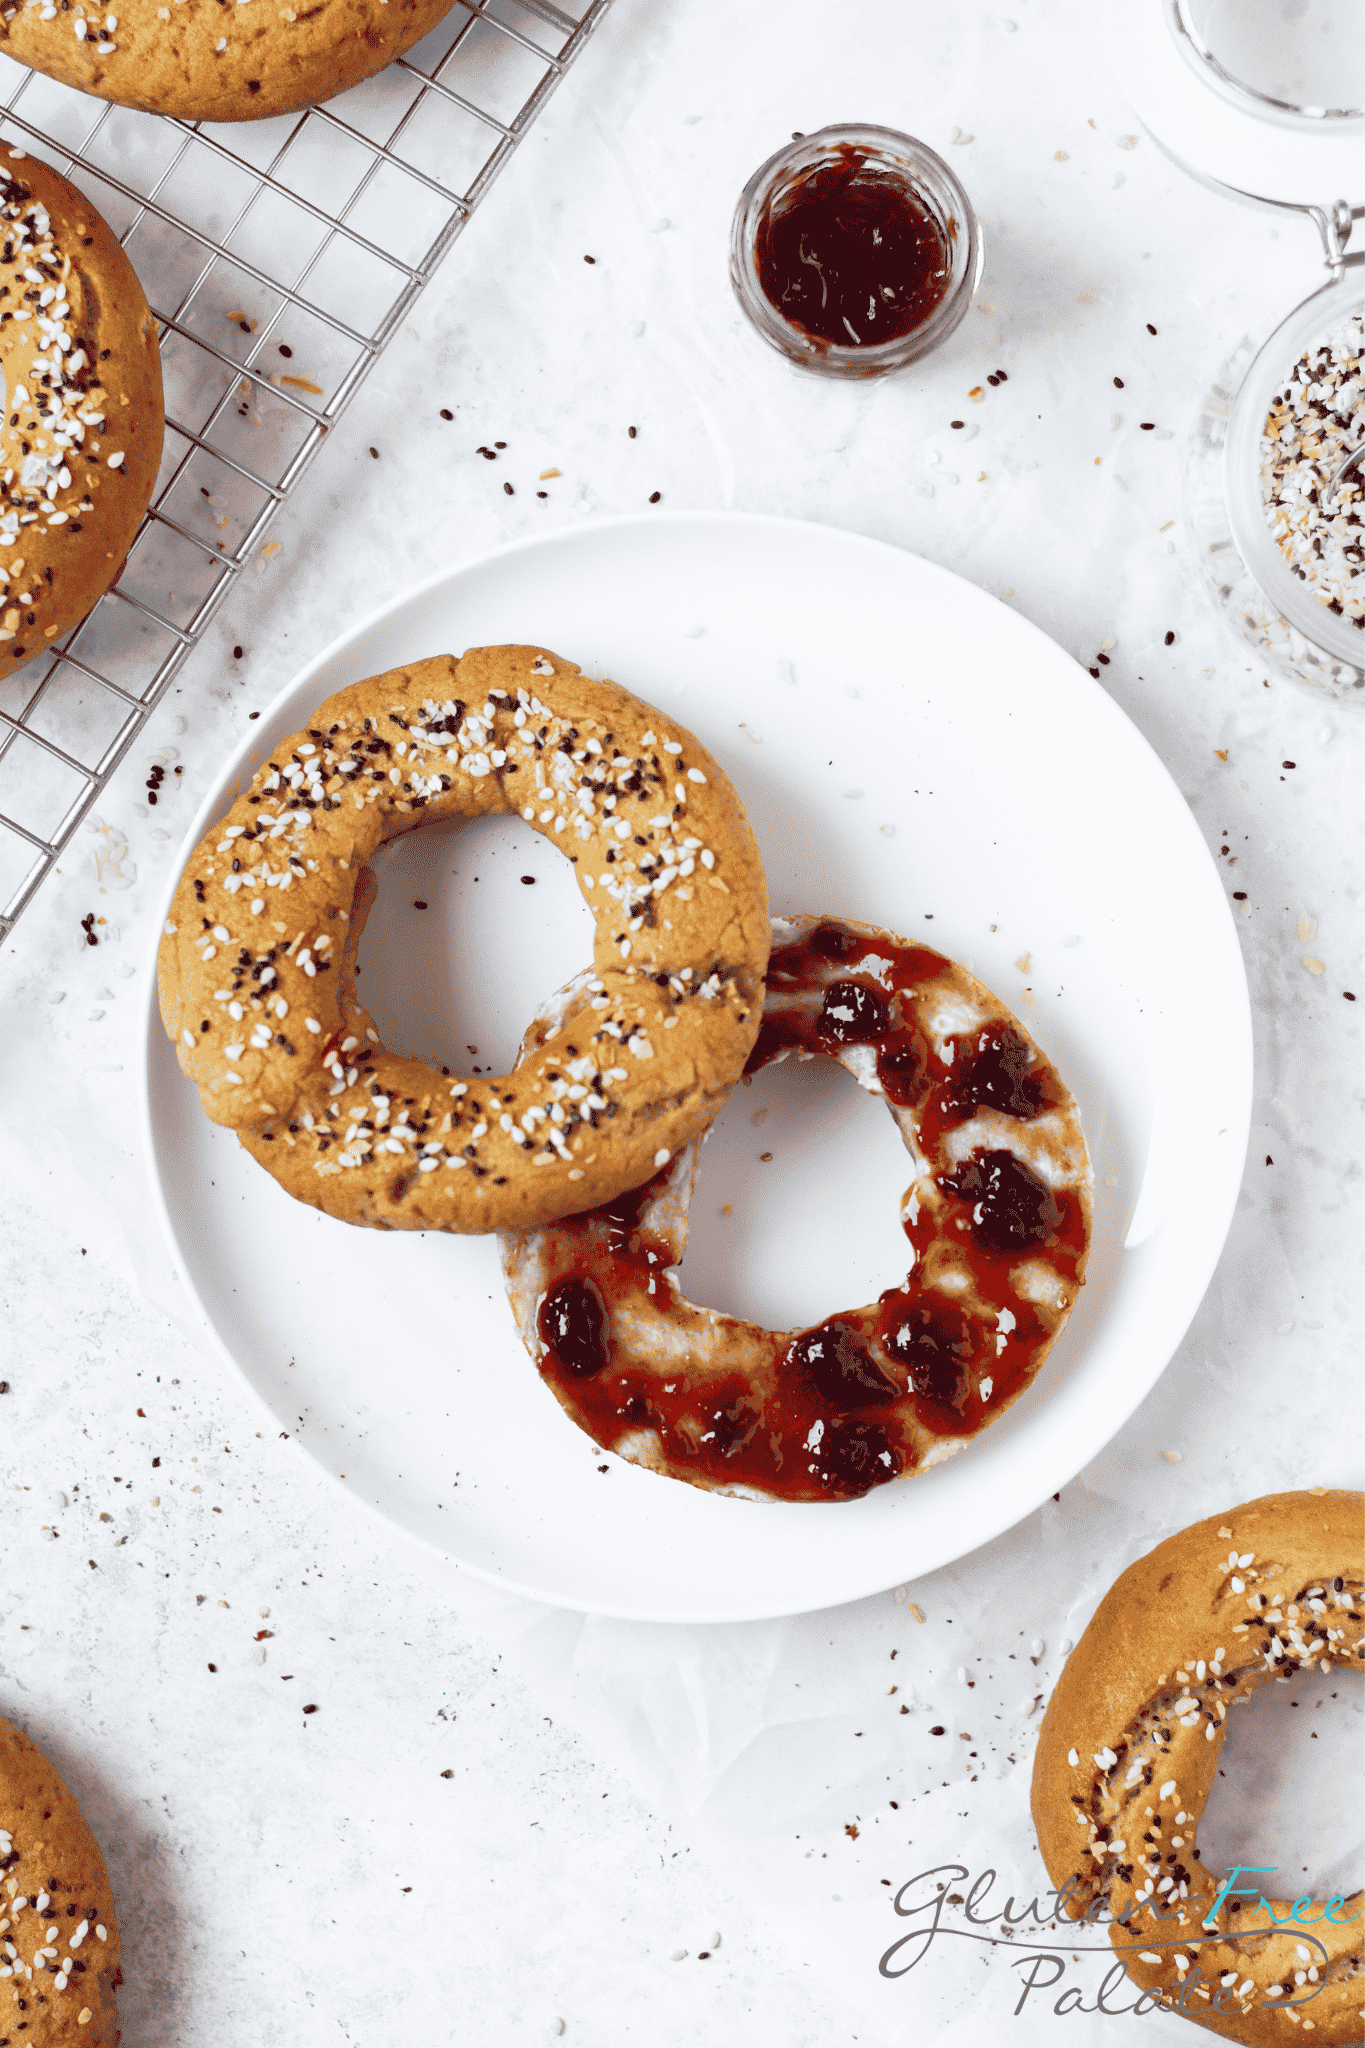 looking down at a round white plate with an everything bagel on it, sliced, filled with berry jam.